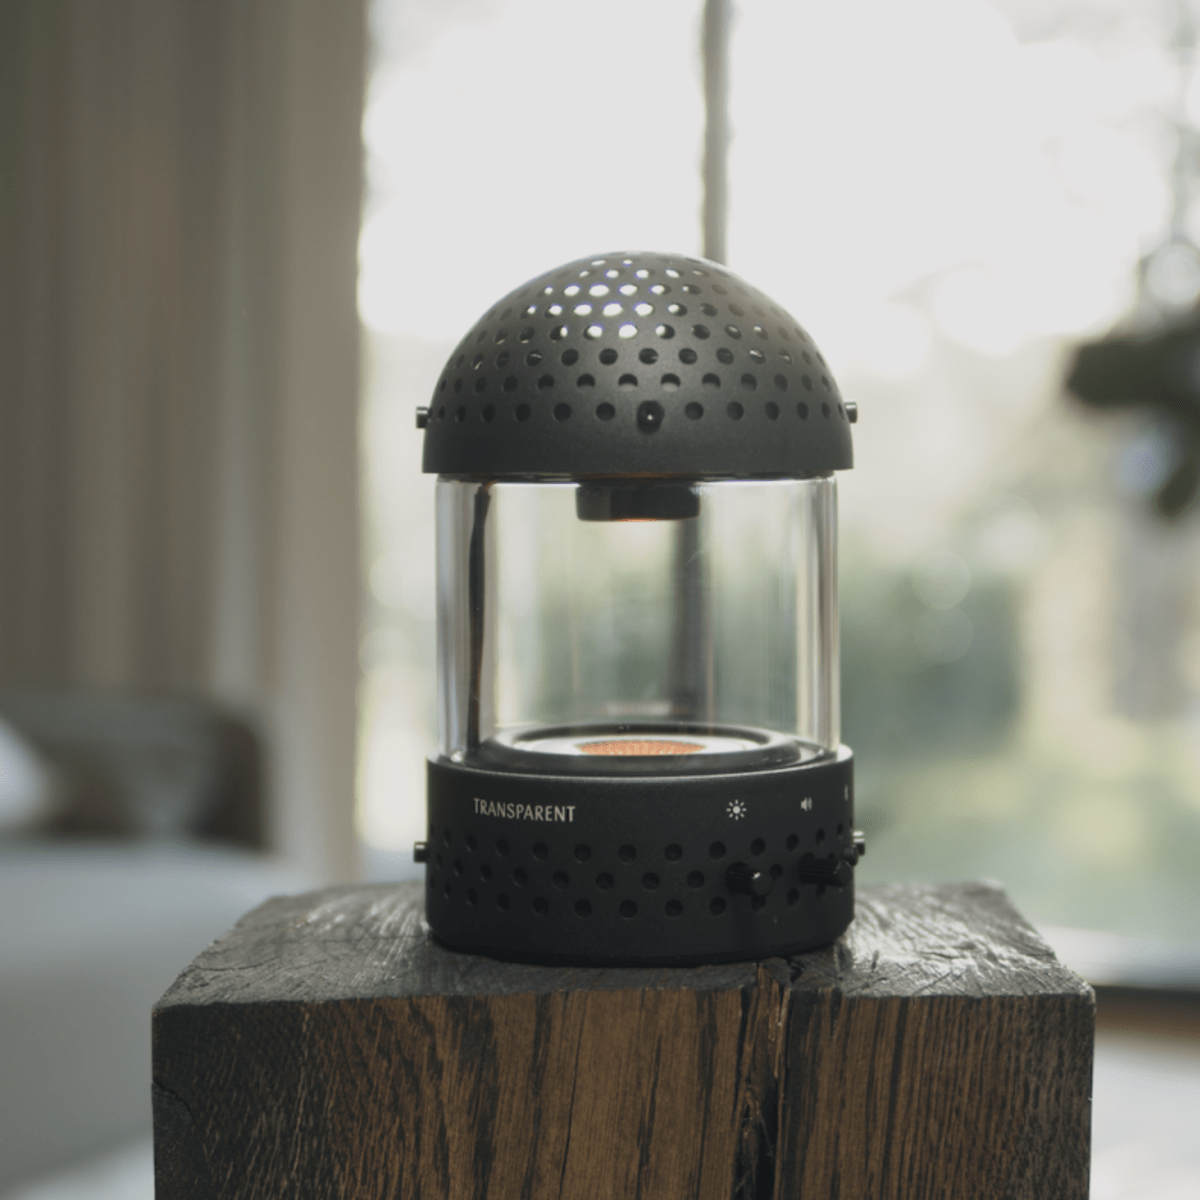 Transparent created a glass lantern with an integrated wireless